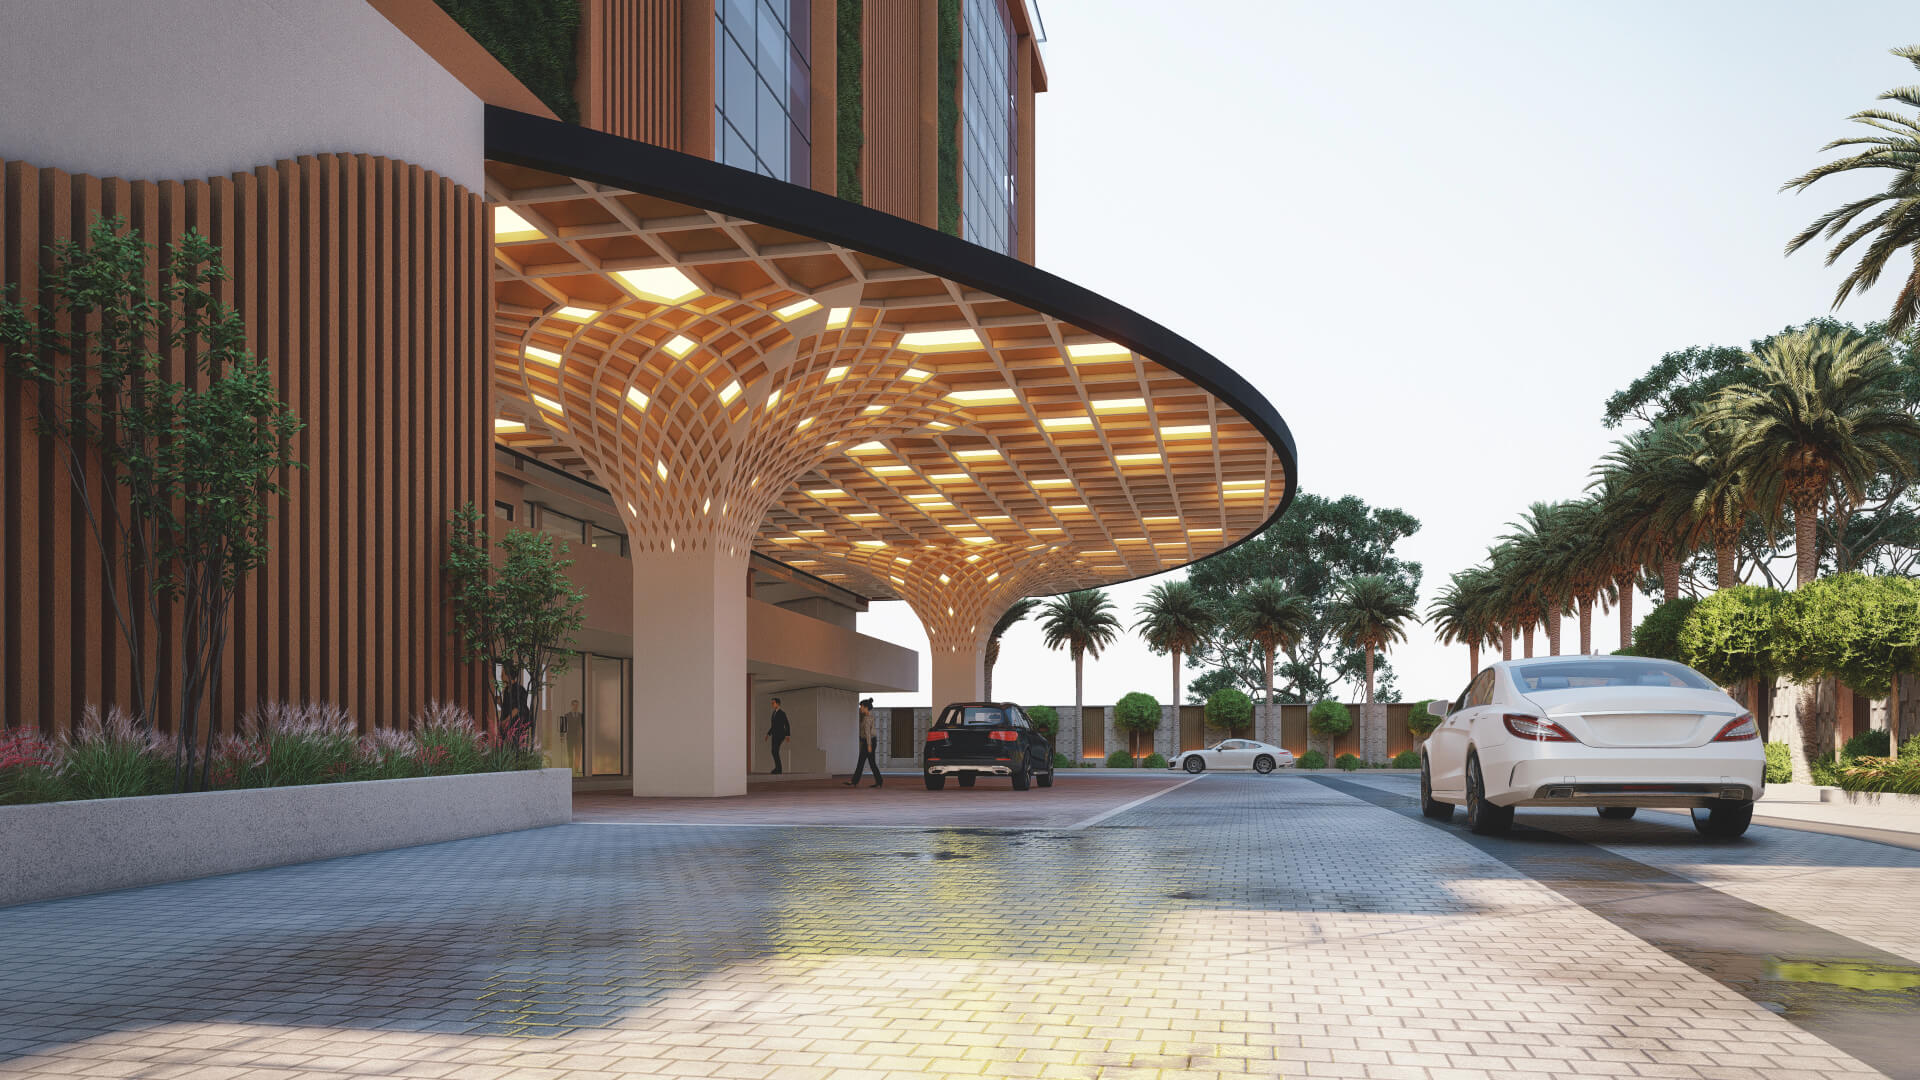 Grand Entrances Transforming Lobbies with 3D Architectural Rendering Expertise